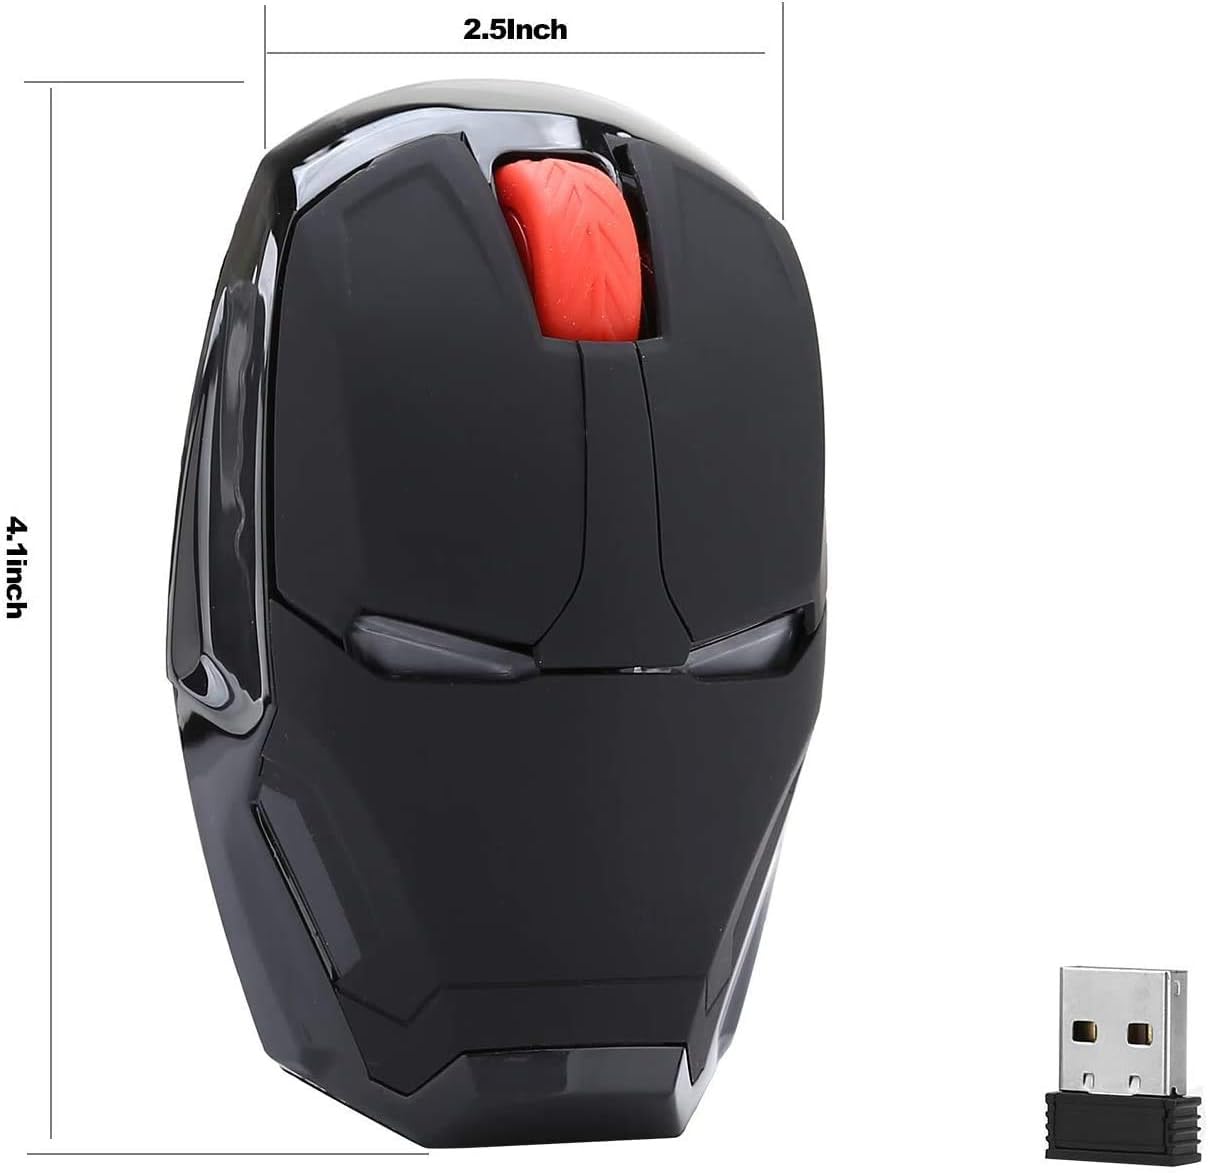 Wfb Ergonomic Wireless Computer Mouse For Kids, 2.4 G Portable Noiseless Mouse Optical Mice With Usb Receiver For Notebook Pc Laptop Computer Mac Book (Black)